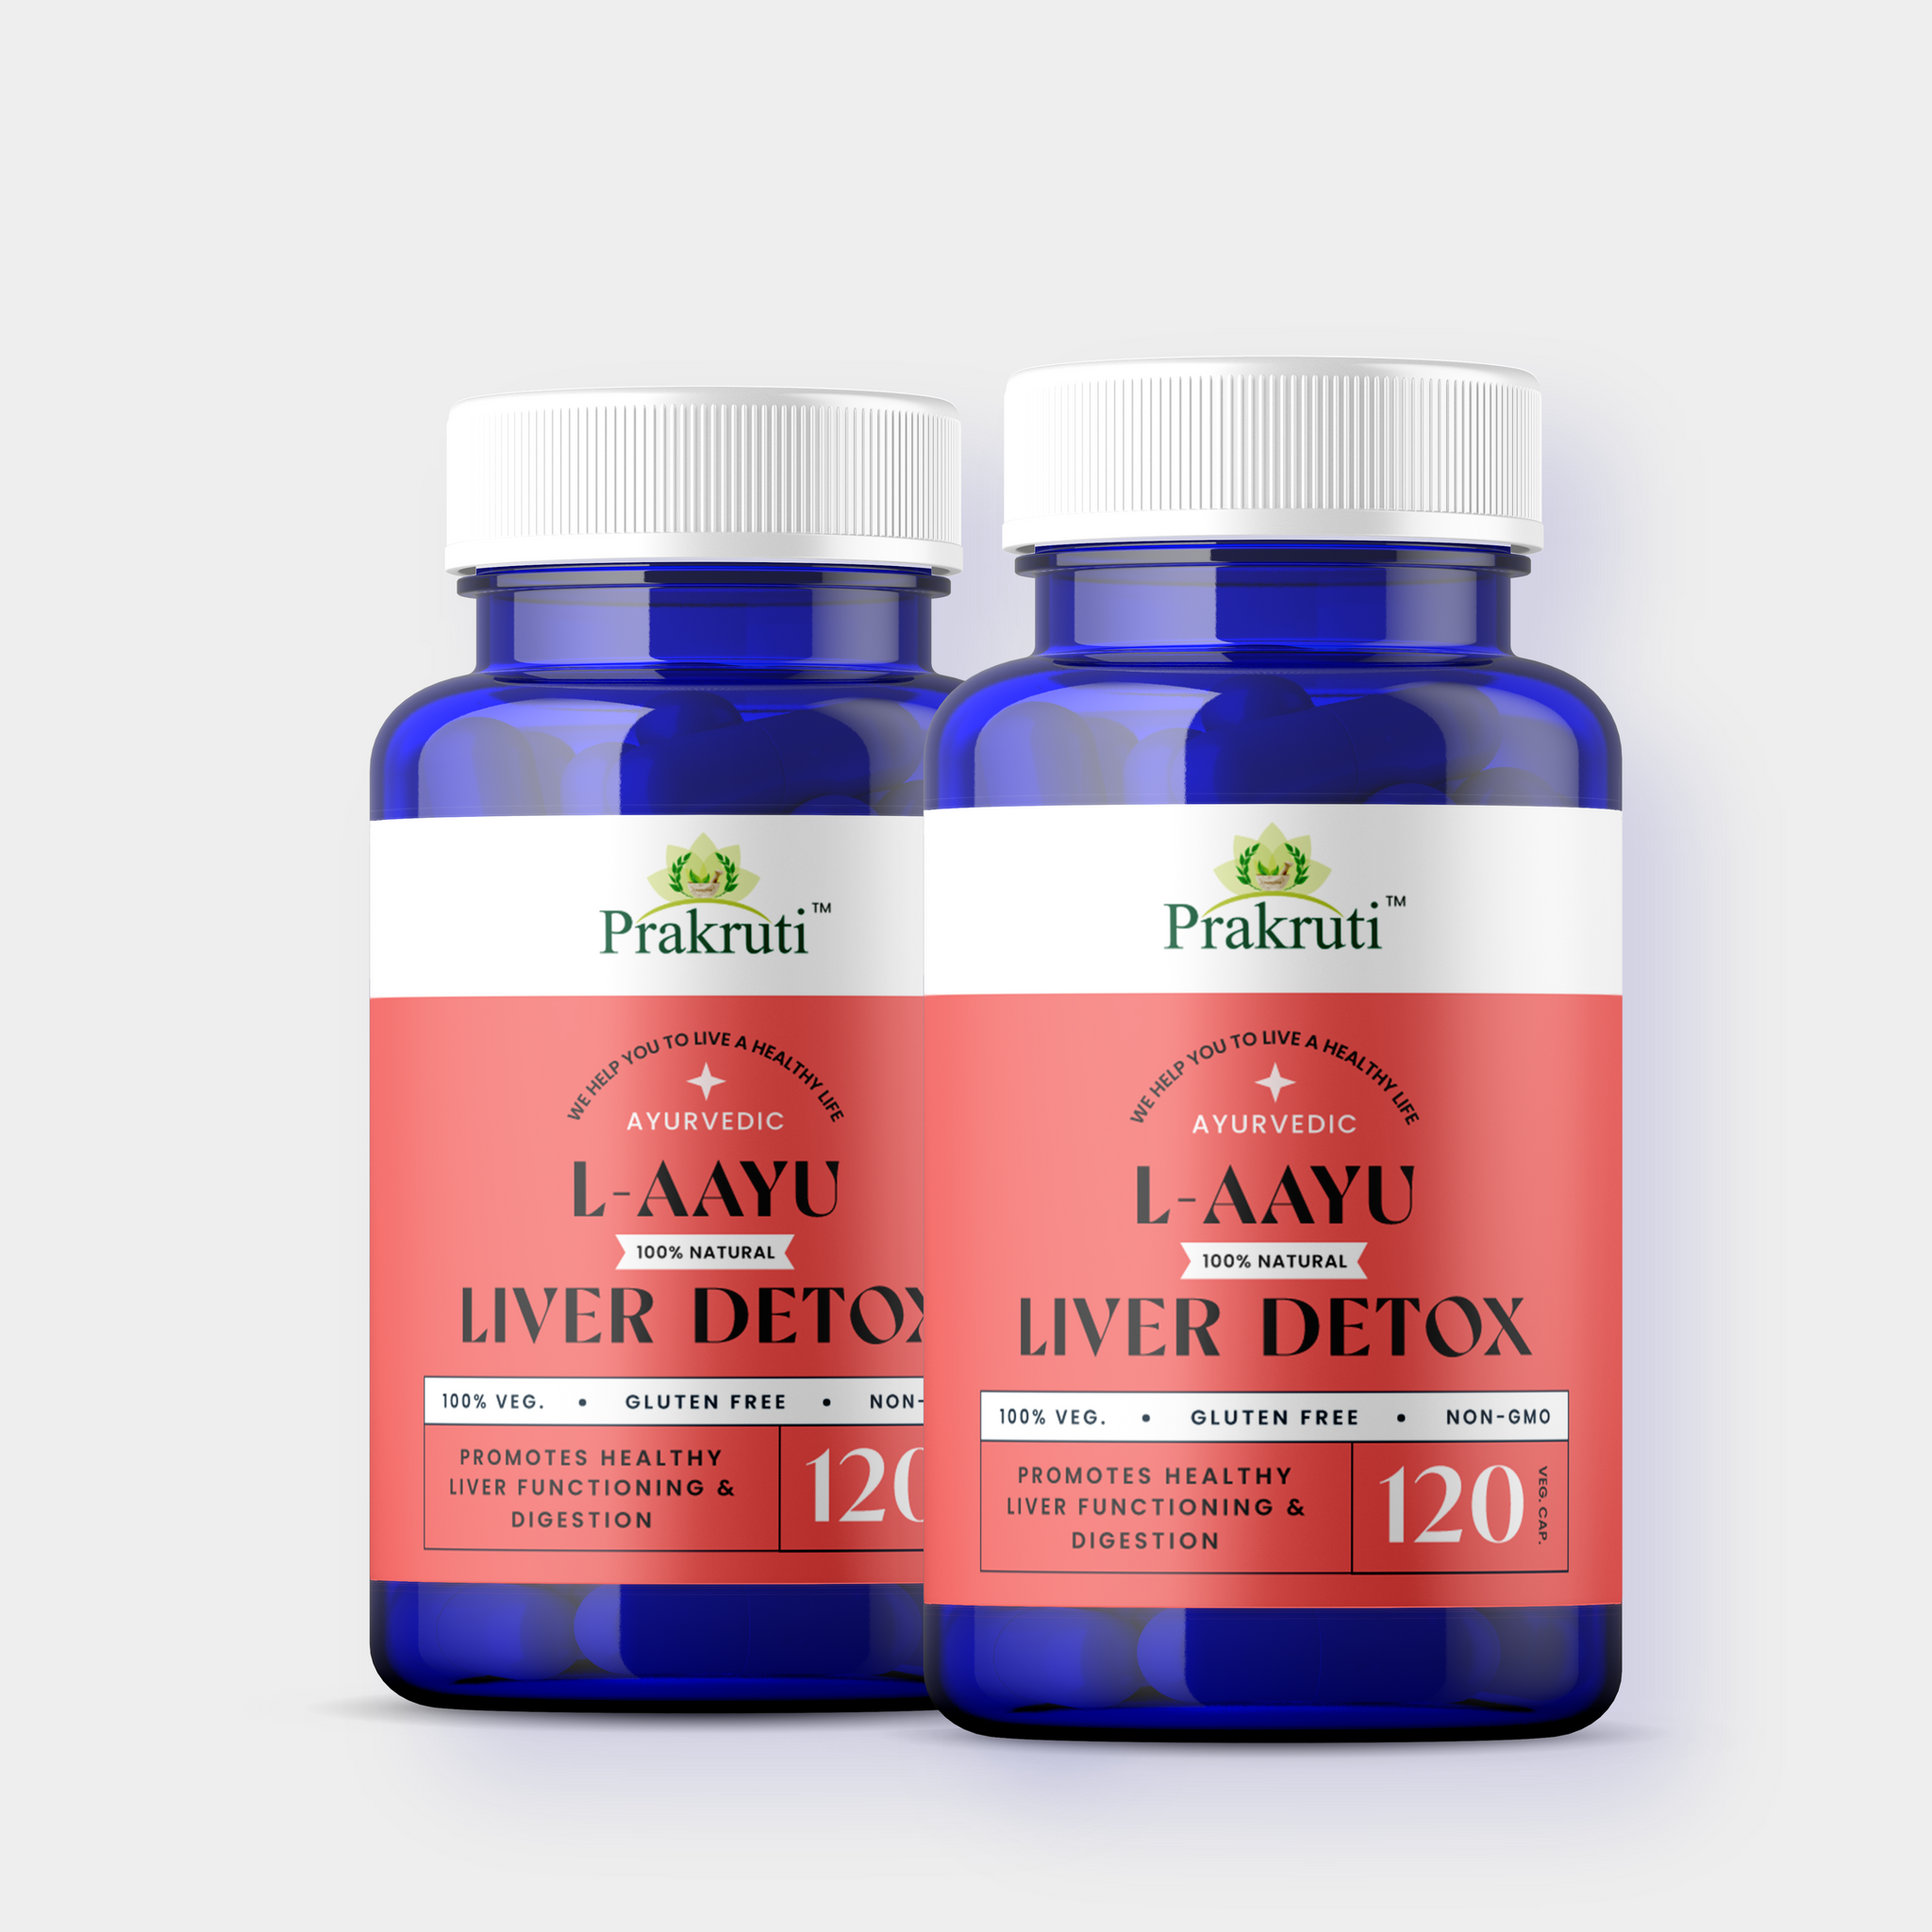 Protection from Fatty Liver & Liver Detox | L-Aayu